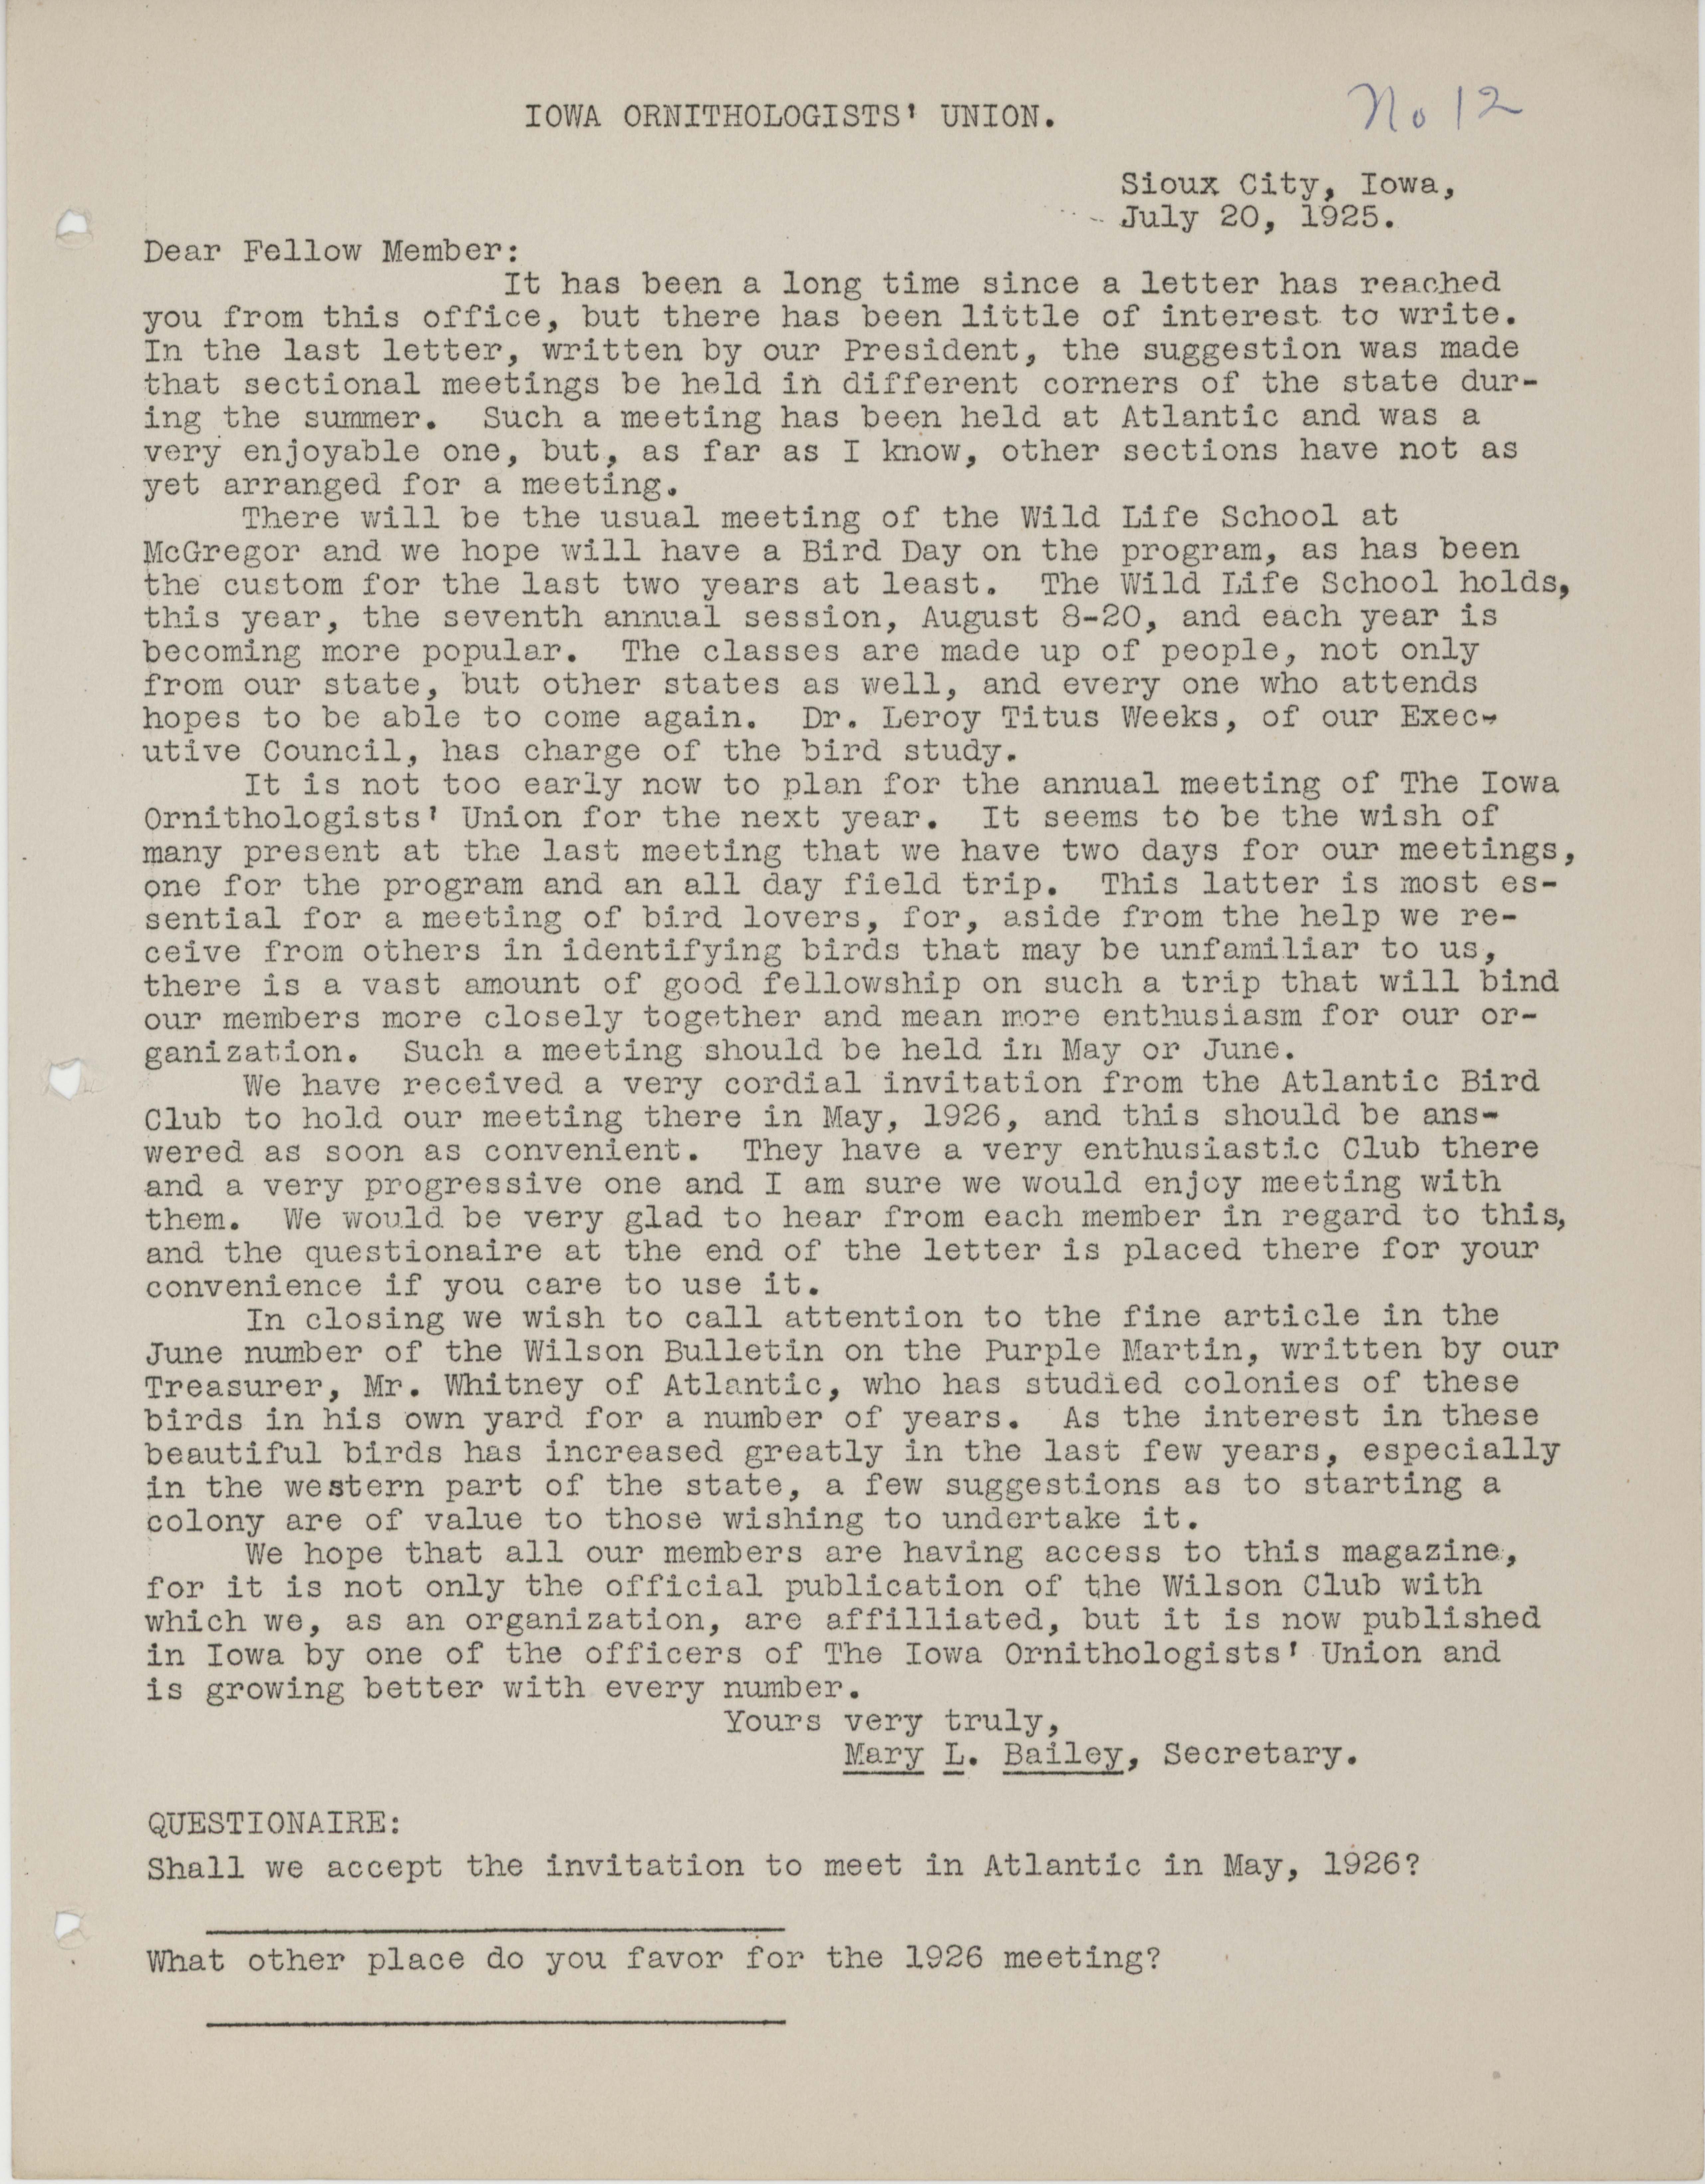 Letter to members of the Iowa Ornithologists' Union regarding planning for the next annual meeting, July 20, 1925